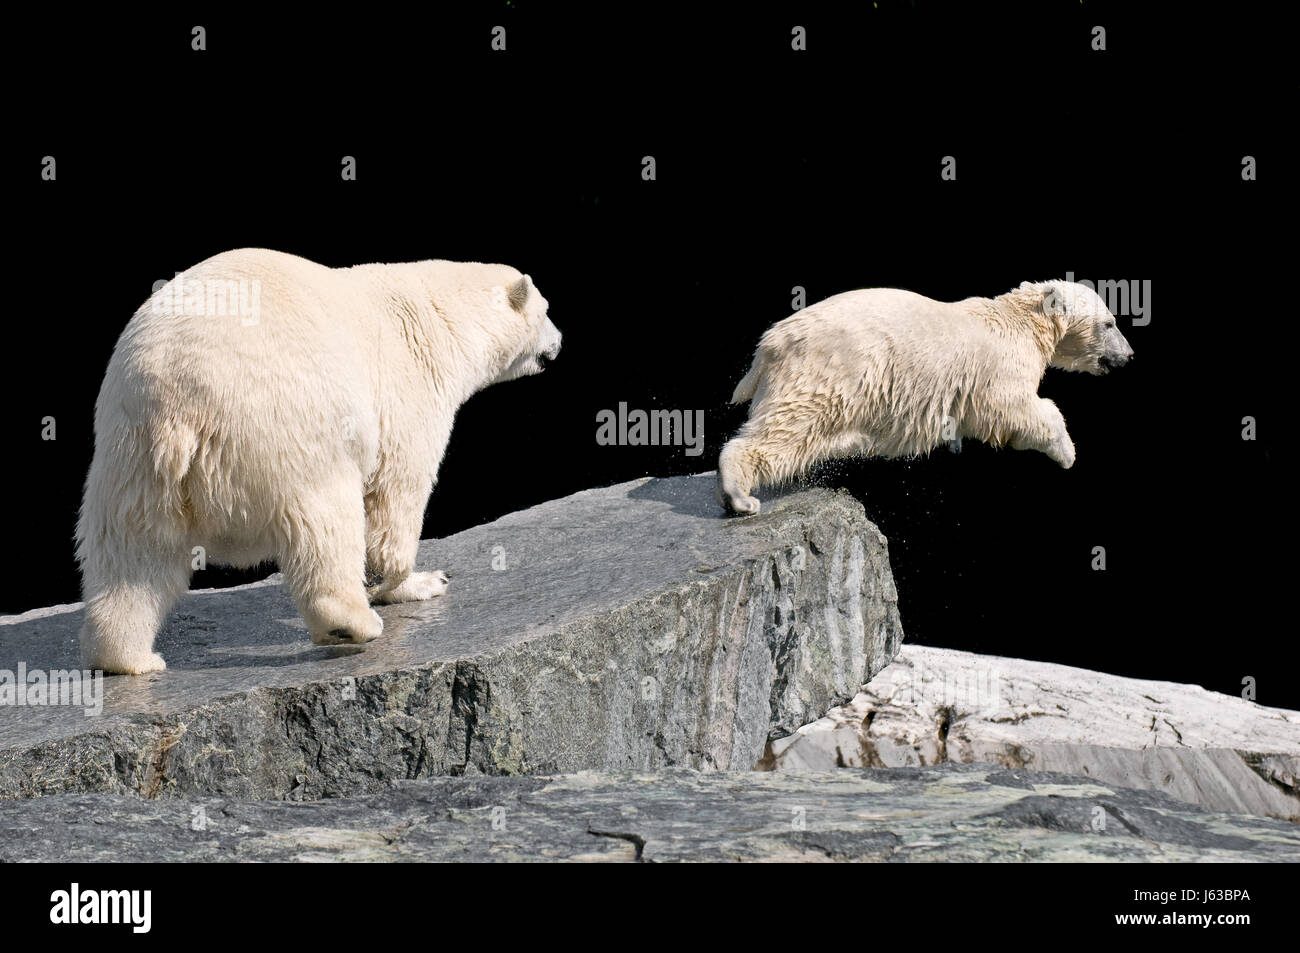 L'ours polaire ours polaire animal hunter predator pierre mammifère ours polaire loup solitaire Banque D'Images